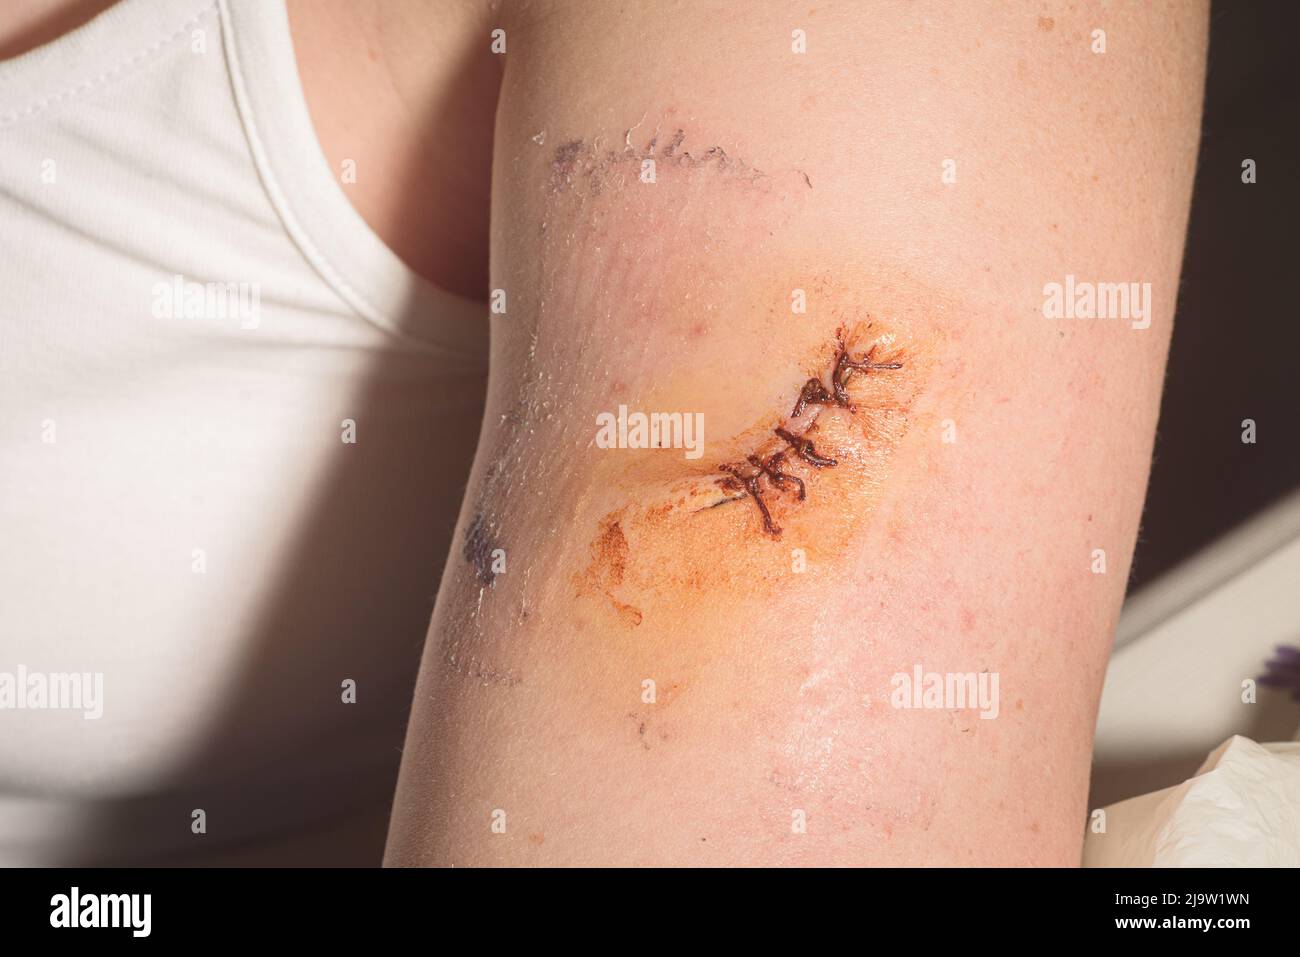 Post-operative wound after removing a mole, closed with surgical stitches, on the arm of a woman, disinfected after removing the plast. Stock Photo